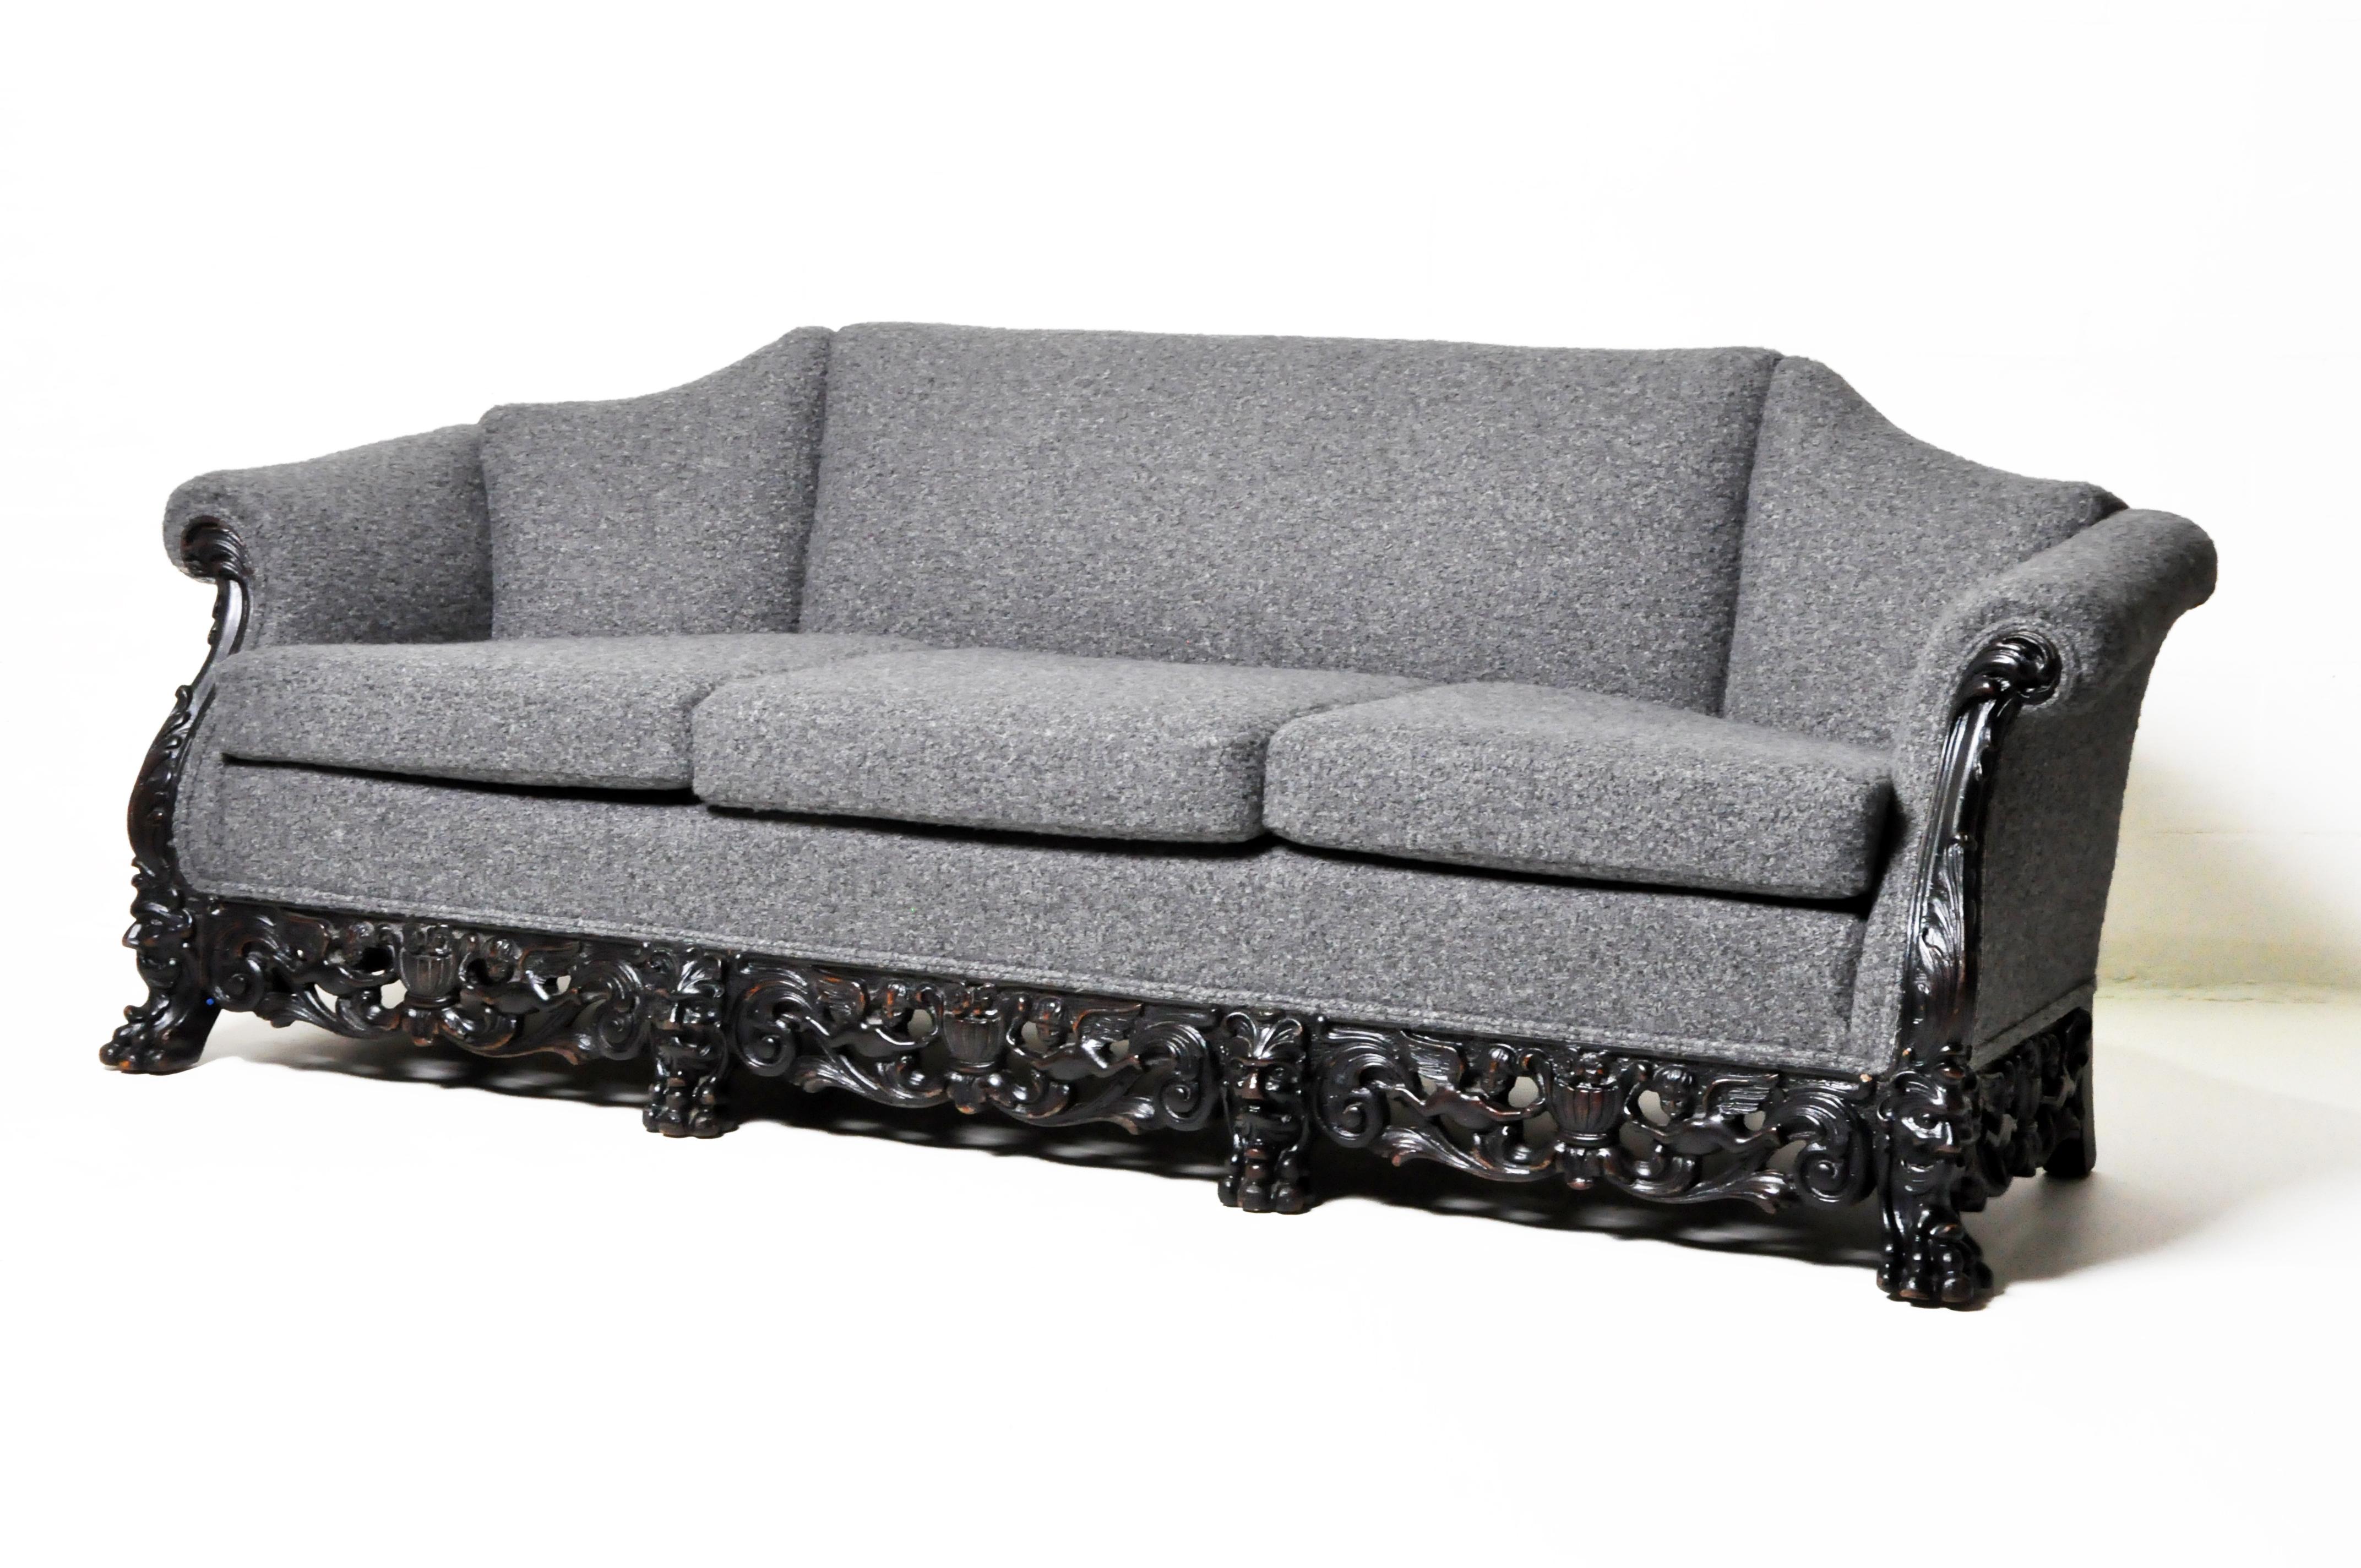 This unique 3-cushion sofa features an extraordinary hand-carved solid Oak frame featuring claw feet, swirling vines, and winged cherubs. The soft bouclé upholstery and interior filling are new and the original frame has been gently cleaned and